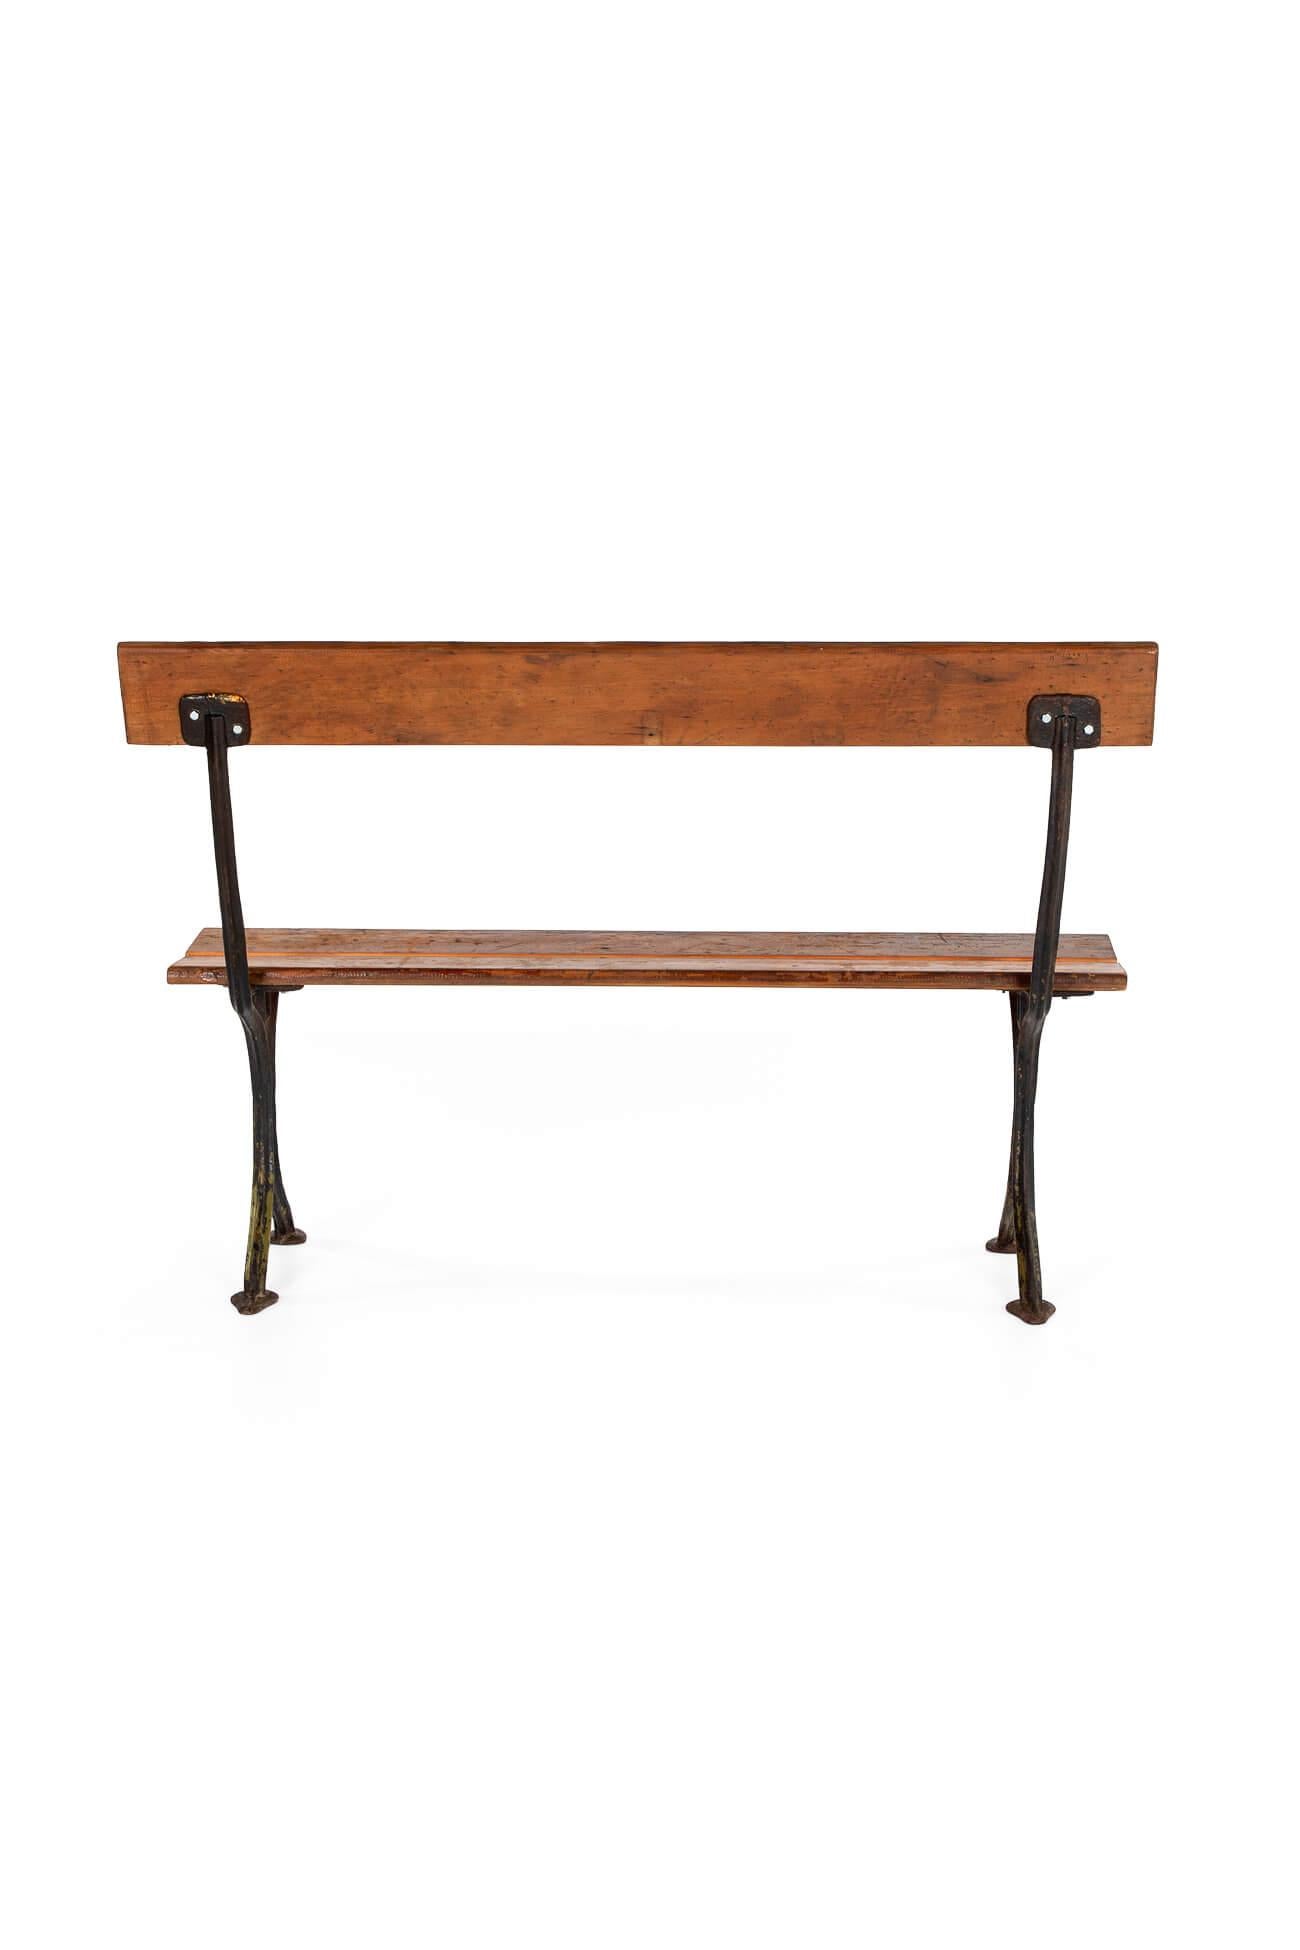 Hand-Crafted Edwardian Bench For Sale